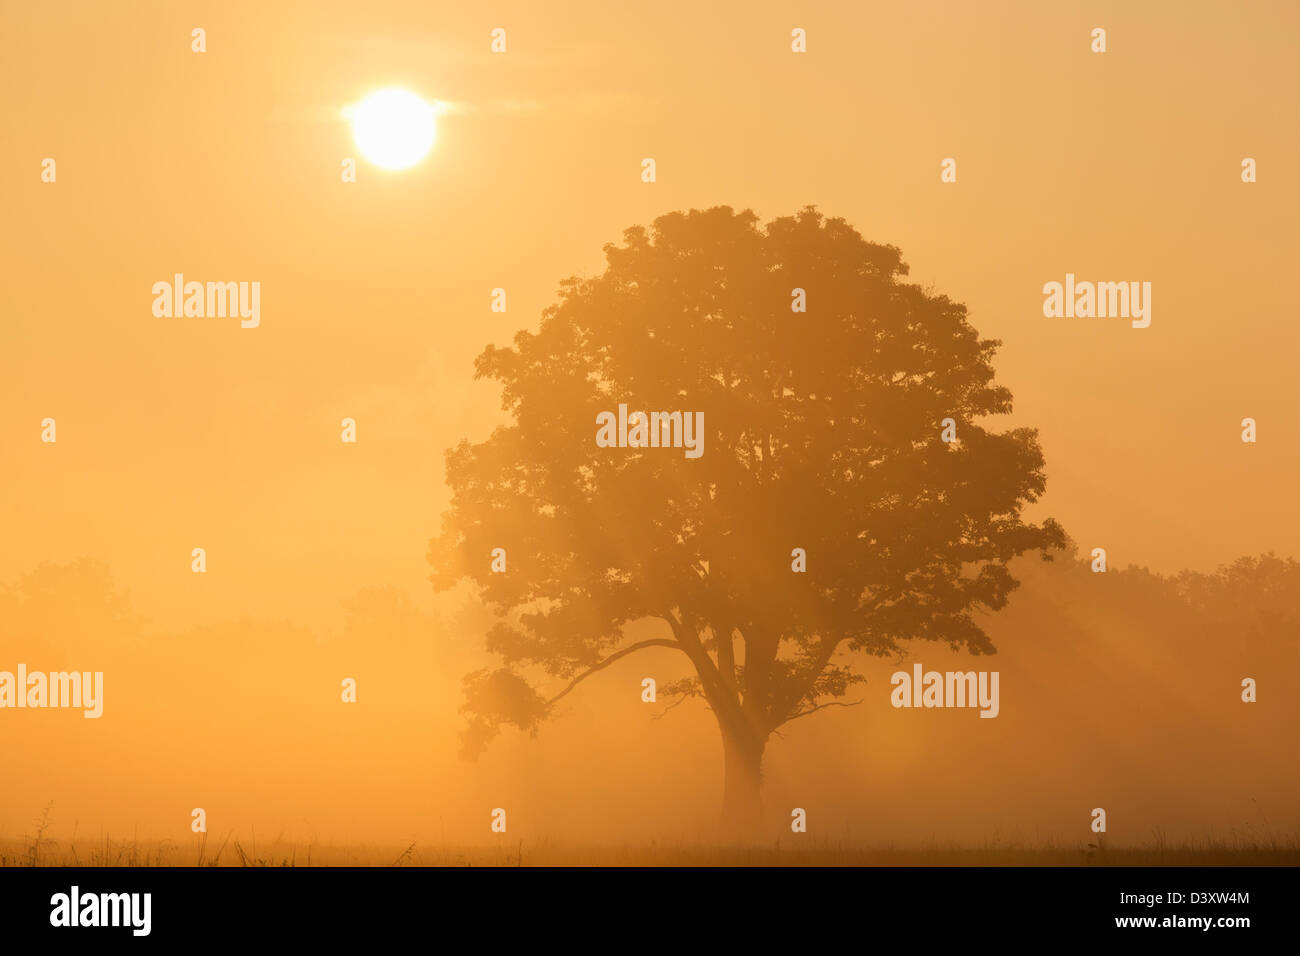 oak tree at sunrise with morning mist streaming through the branches. Stock Photo